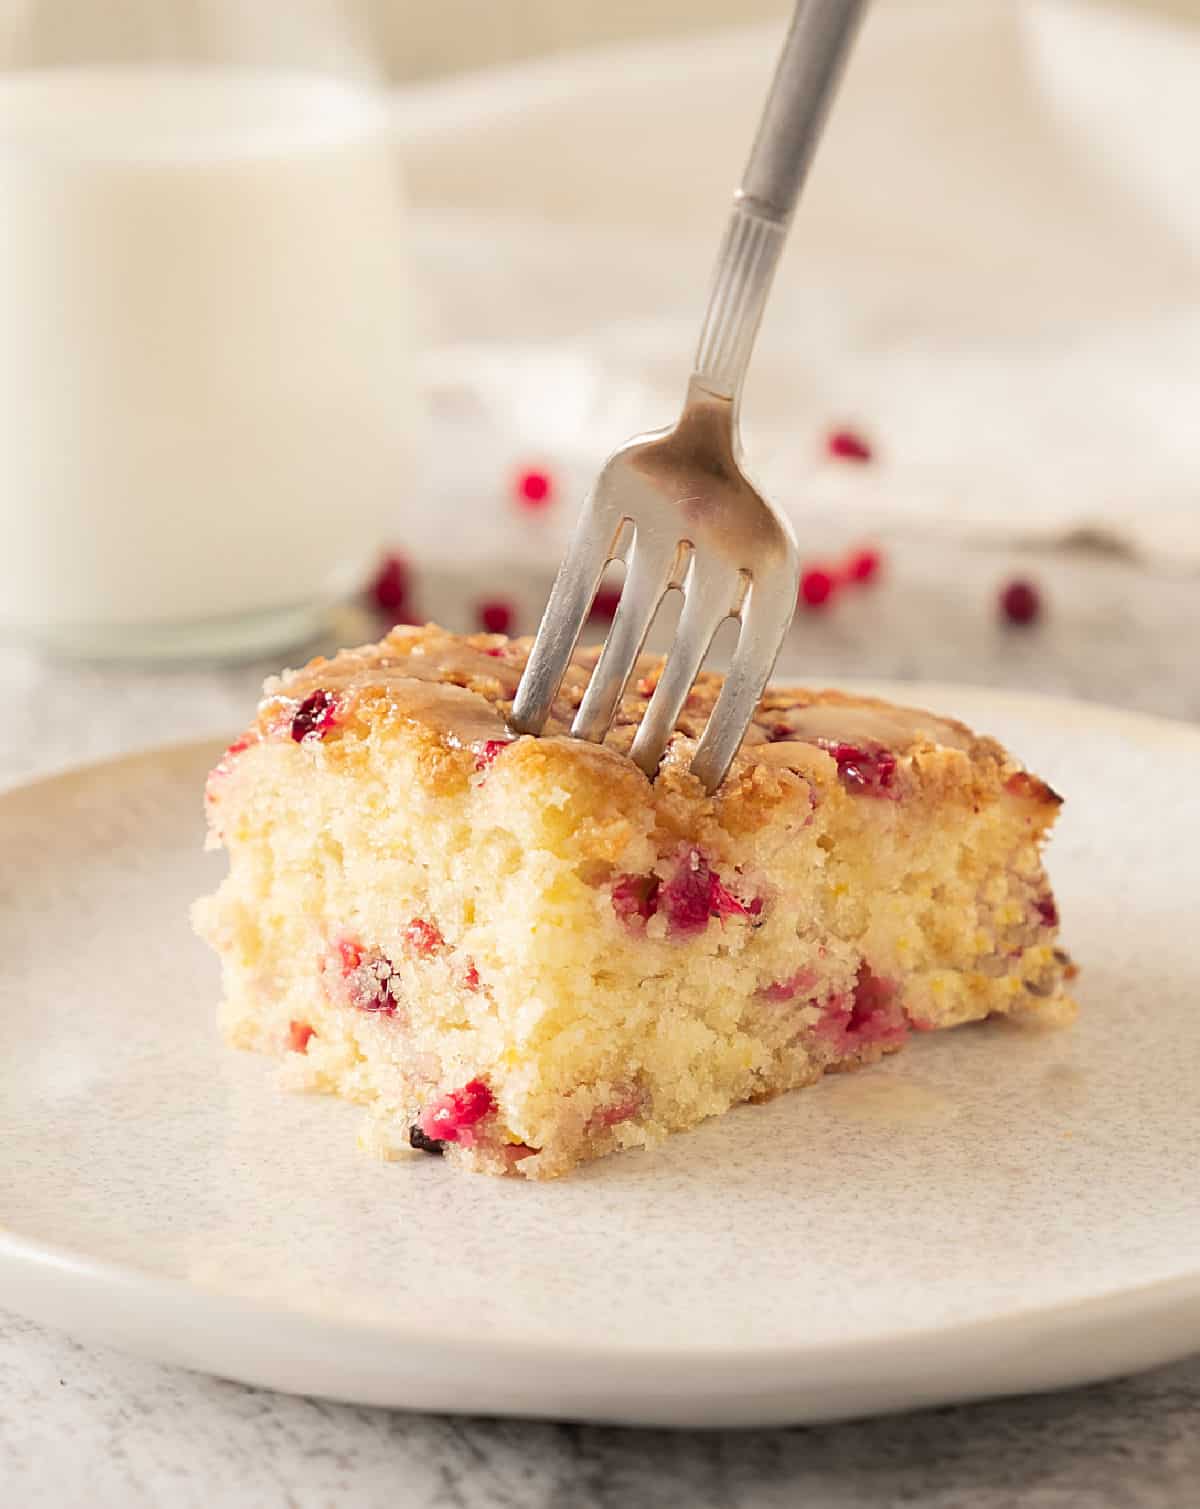 Forking a square of fresh cranberry coffee cake on a white plate. White background with glass of milk.